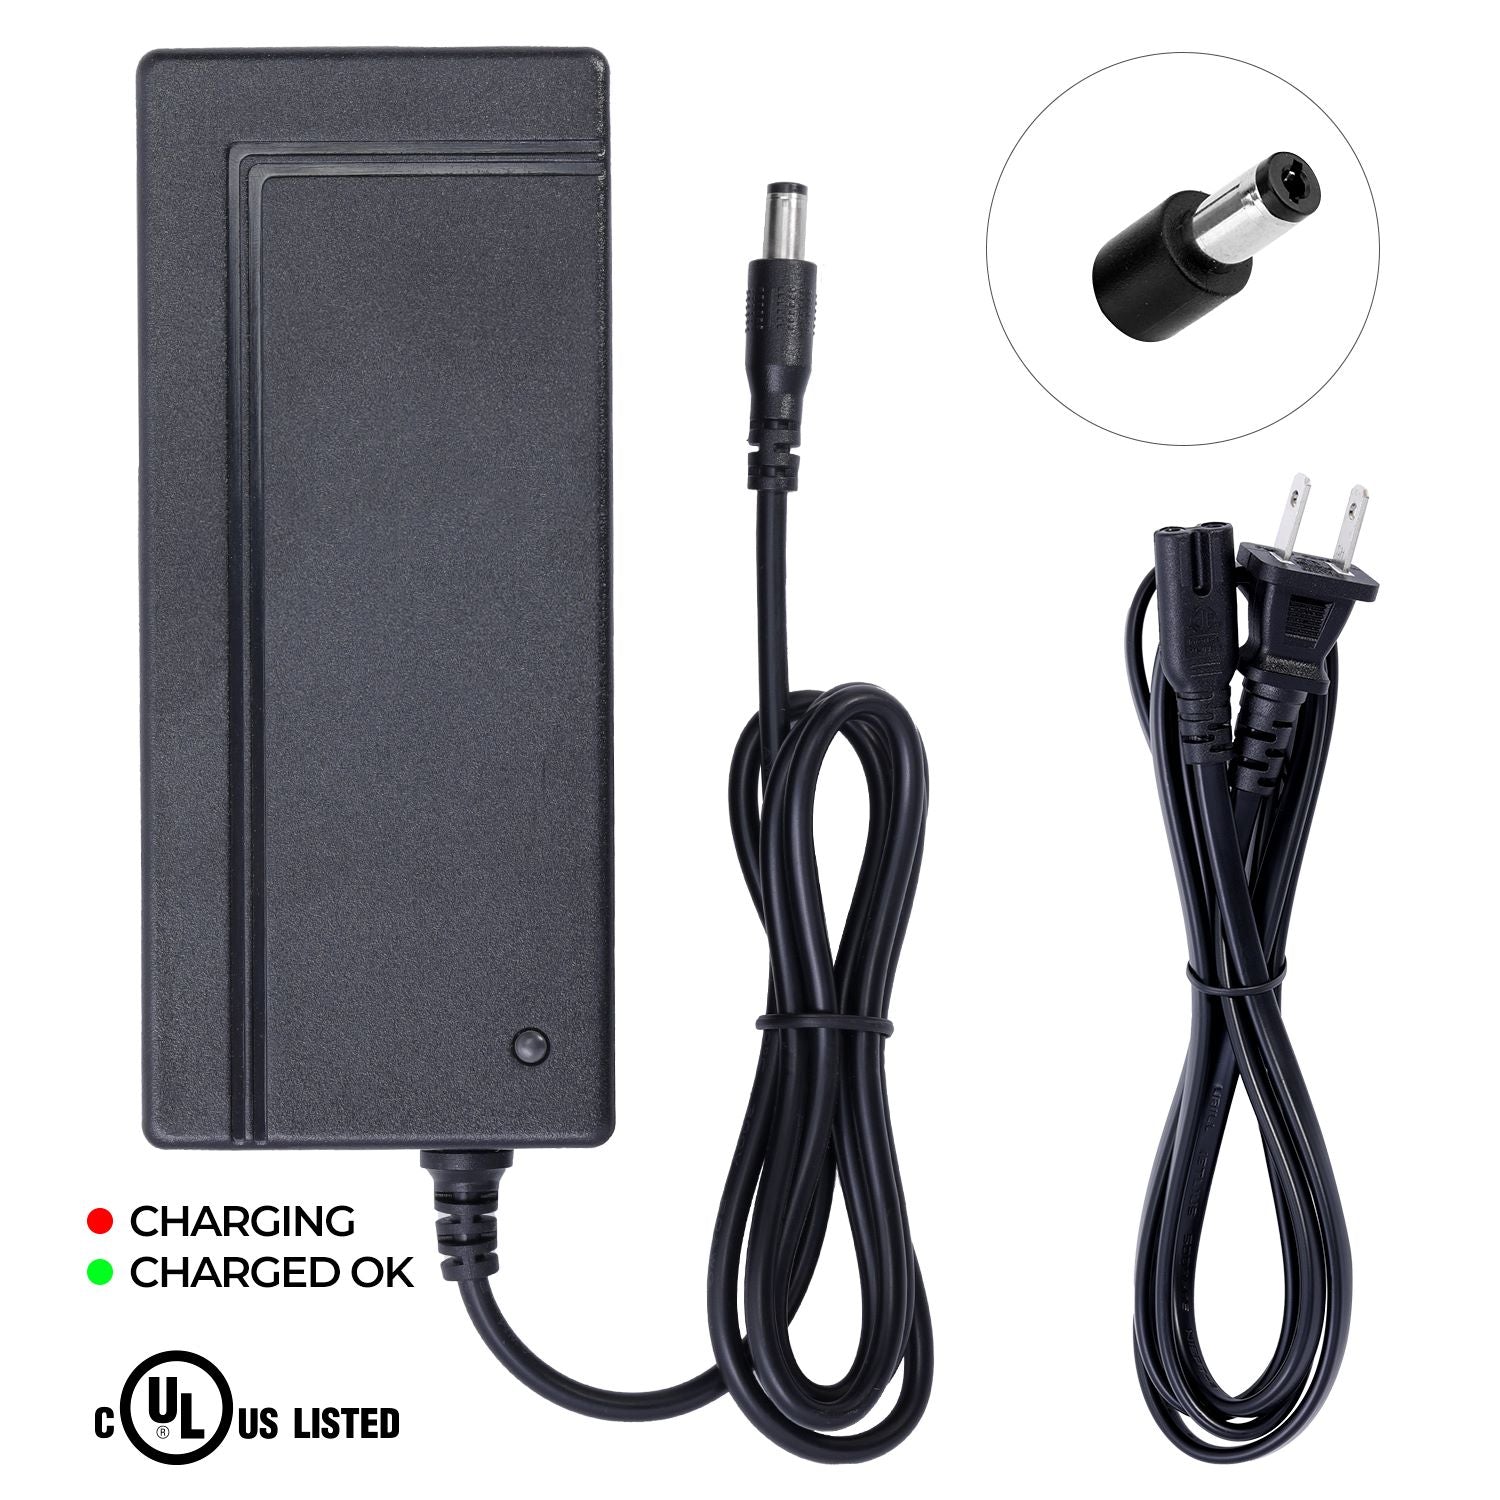 UL Listed Charger for Schwinn Coston DX 27.5 eBike